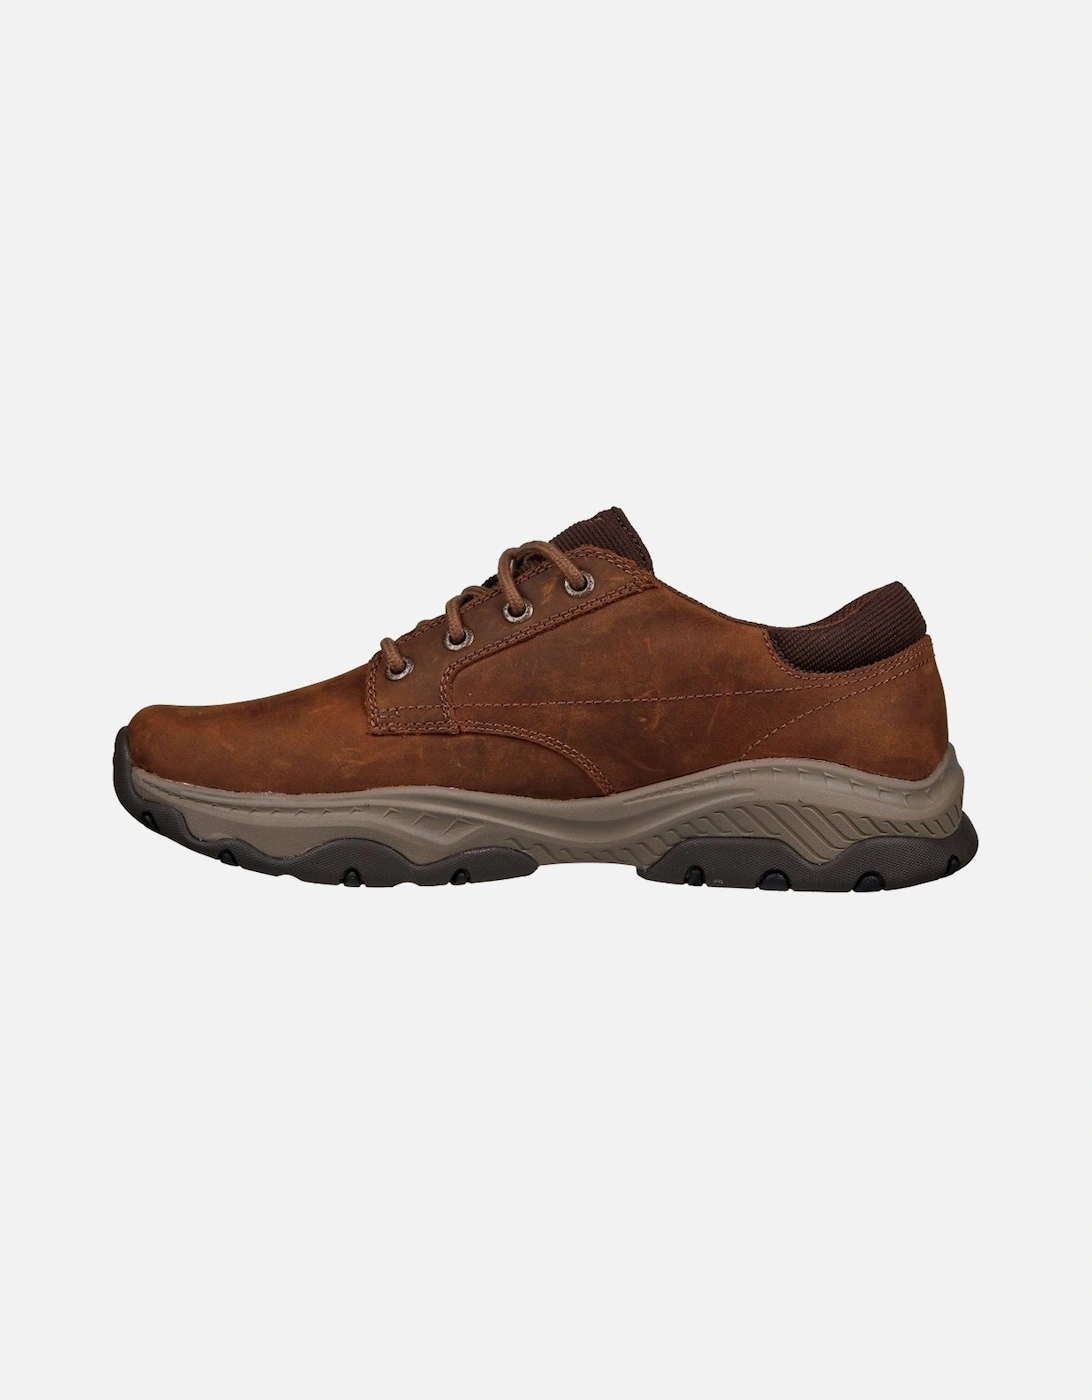 Relaxed Fit: Craster Fenzo Mens Shoes